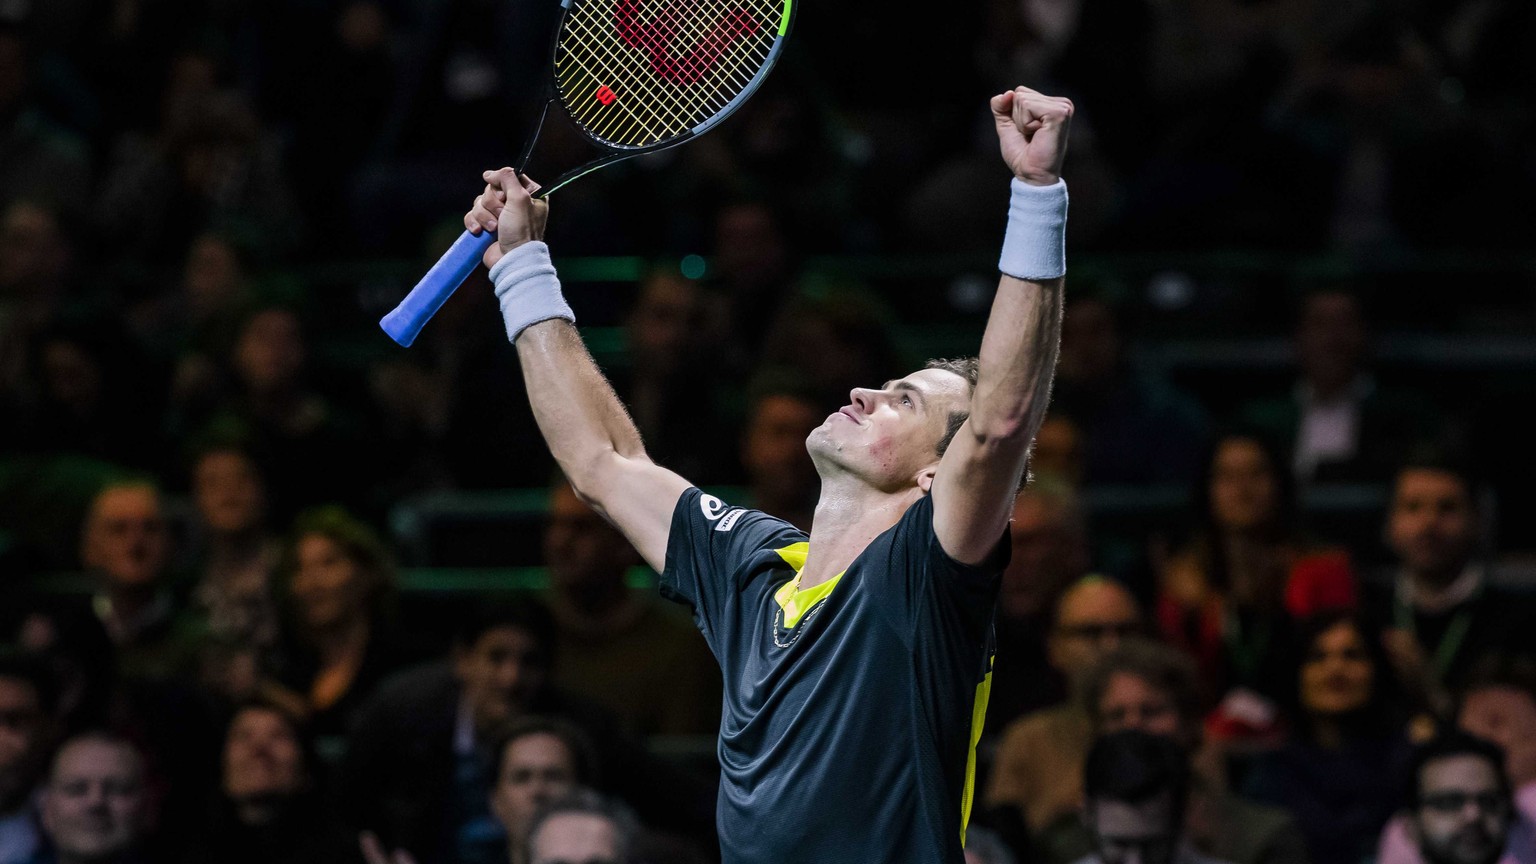 epa08213692 Vasek Pospisil of Canada reacts during his match against Daniil Medvedev from Russia on the third day of the ABN AMRO World Tennis Tournament in Rotterdam, Netherlands, 12 February 2020. E ...